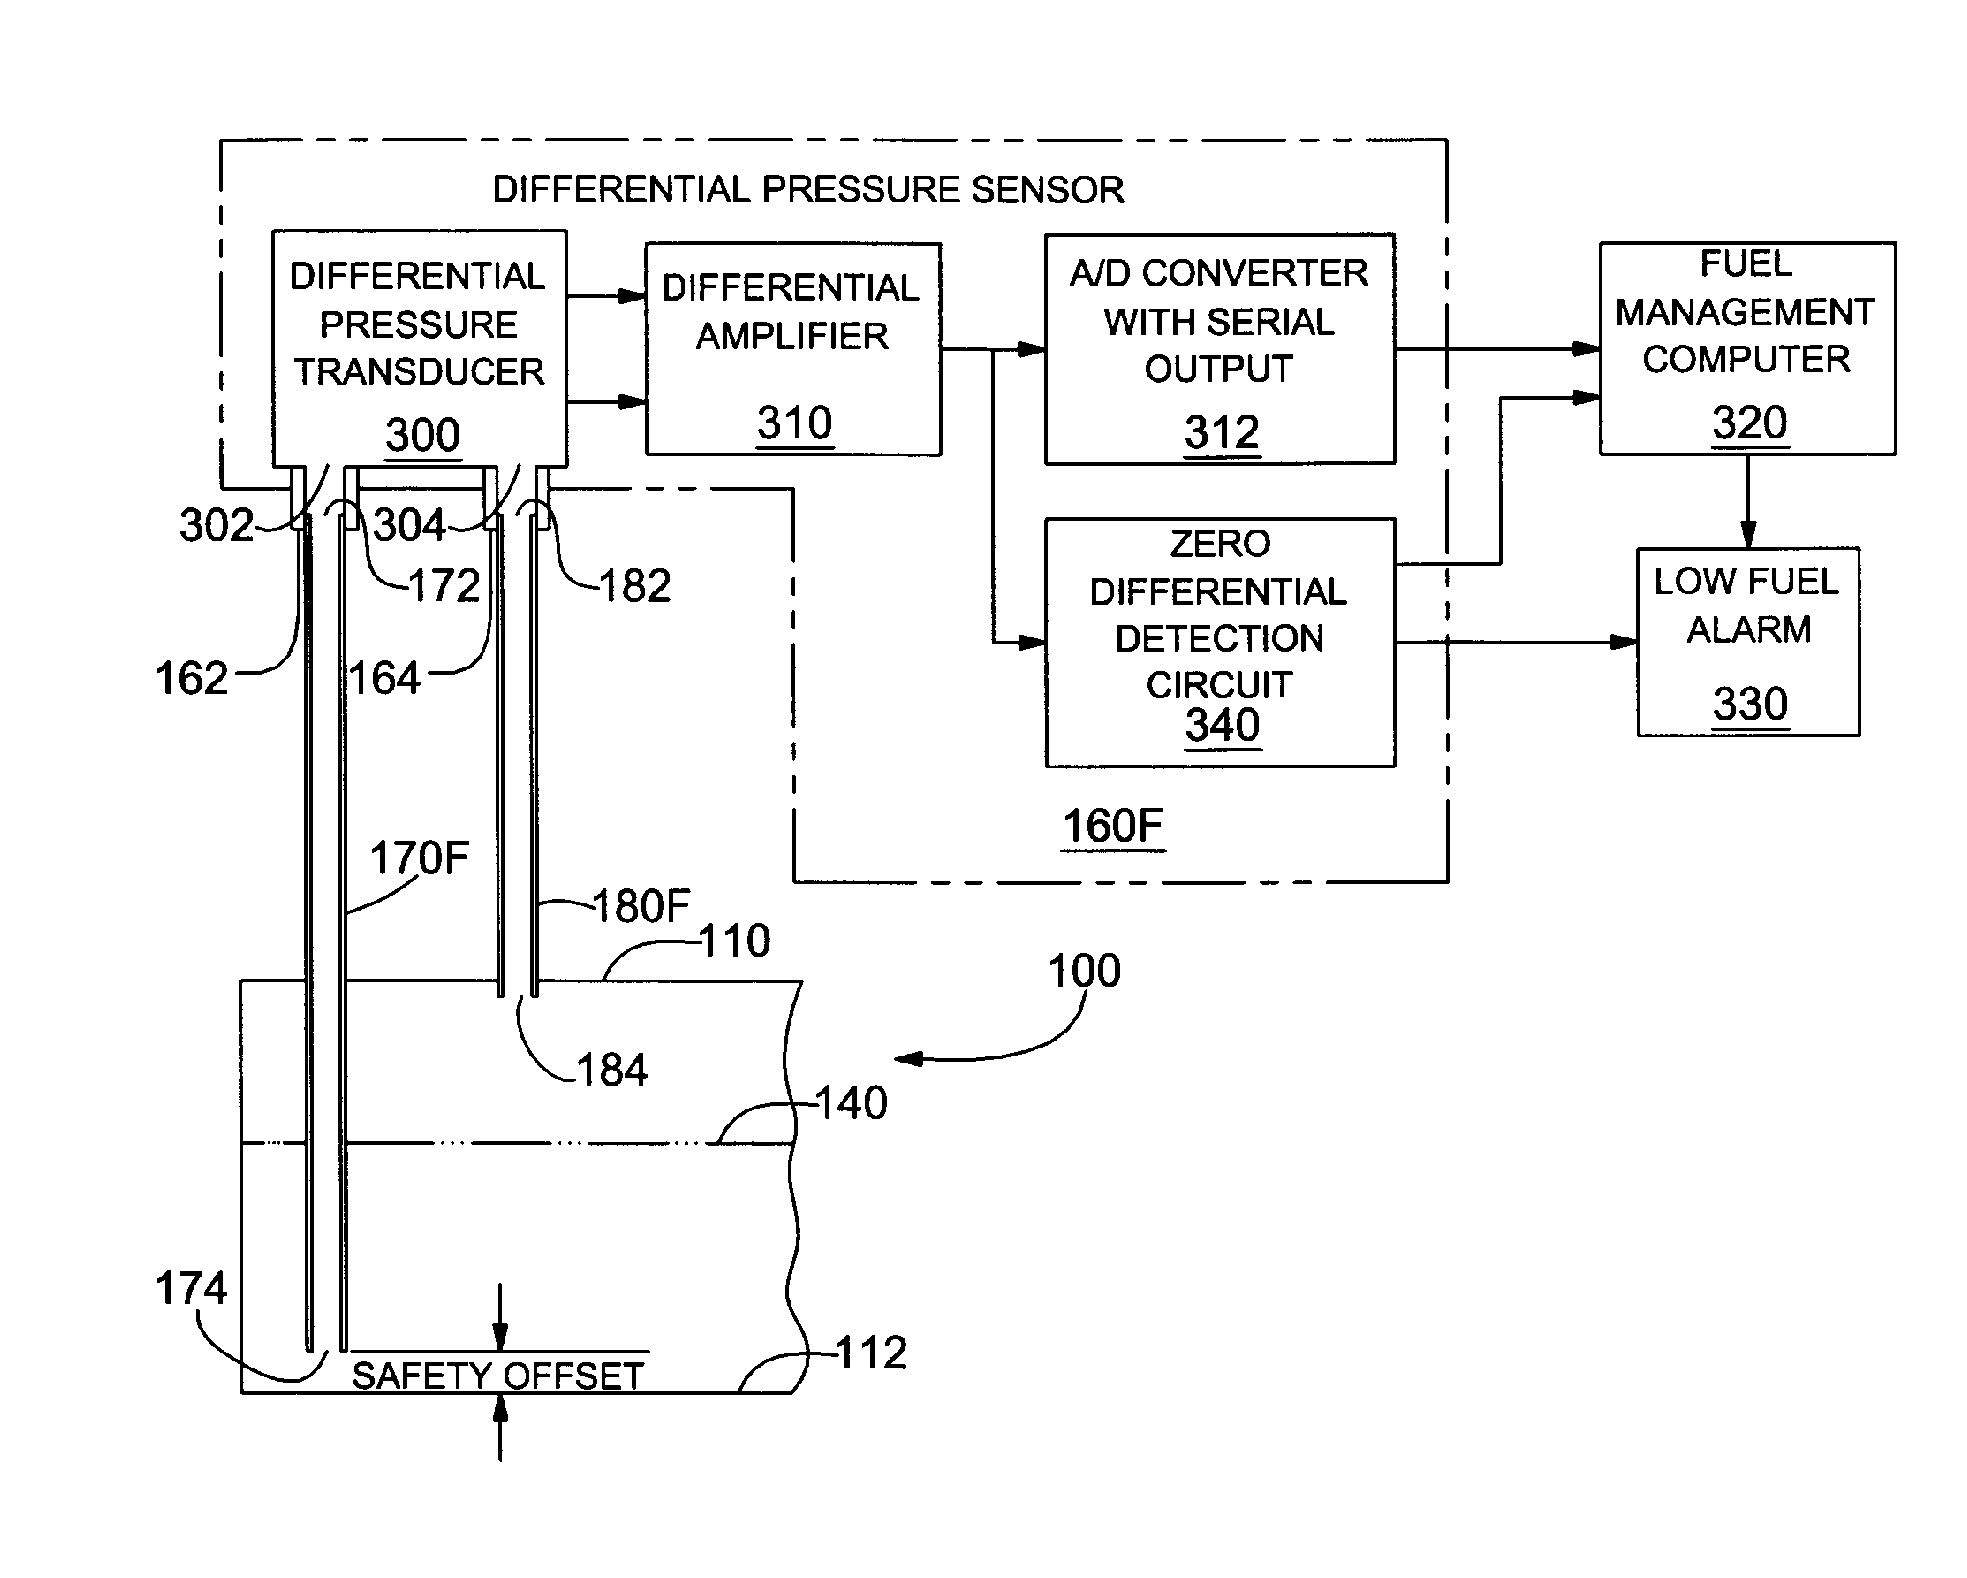 Liquid measurement system having a plurality of differential pressure probes